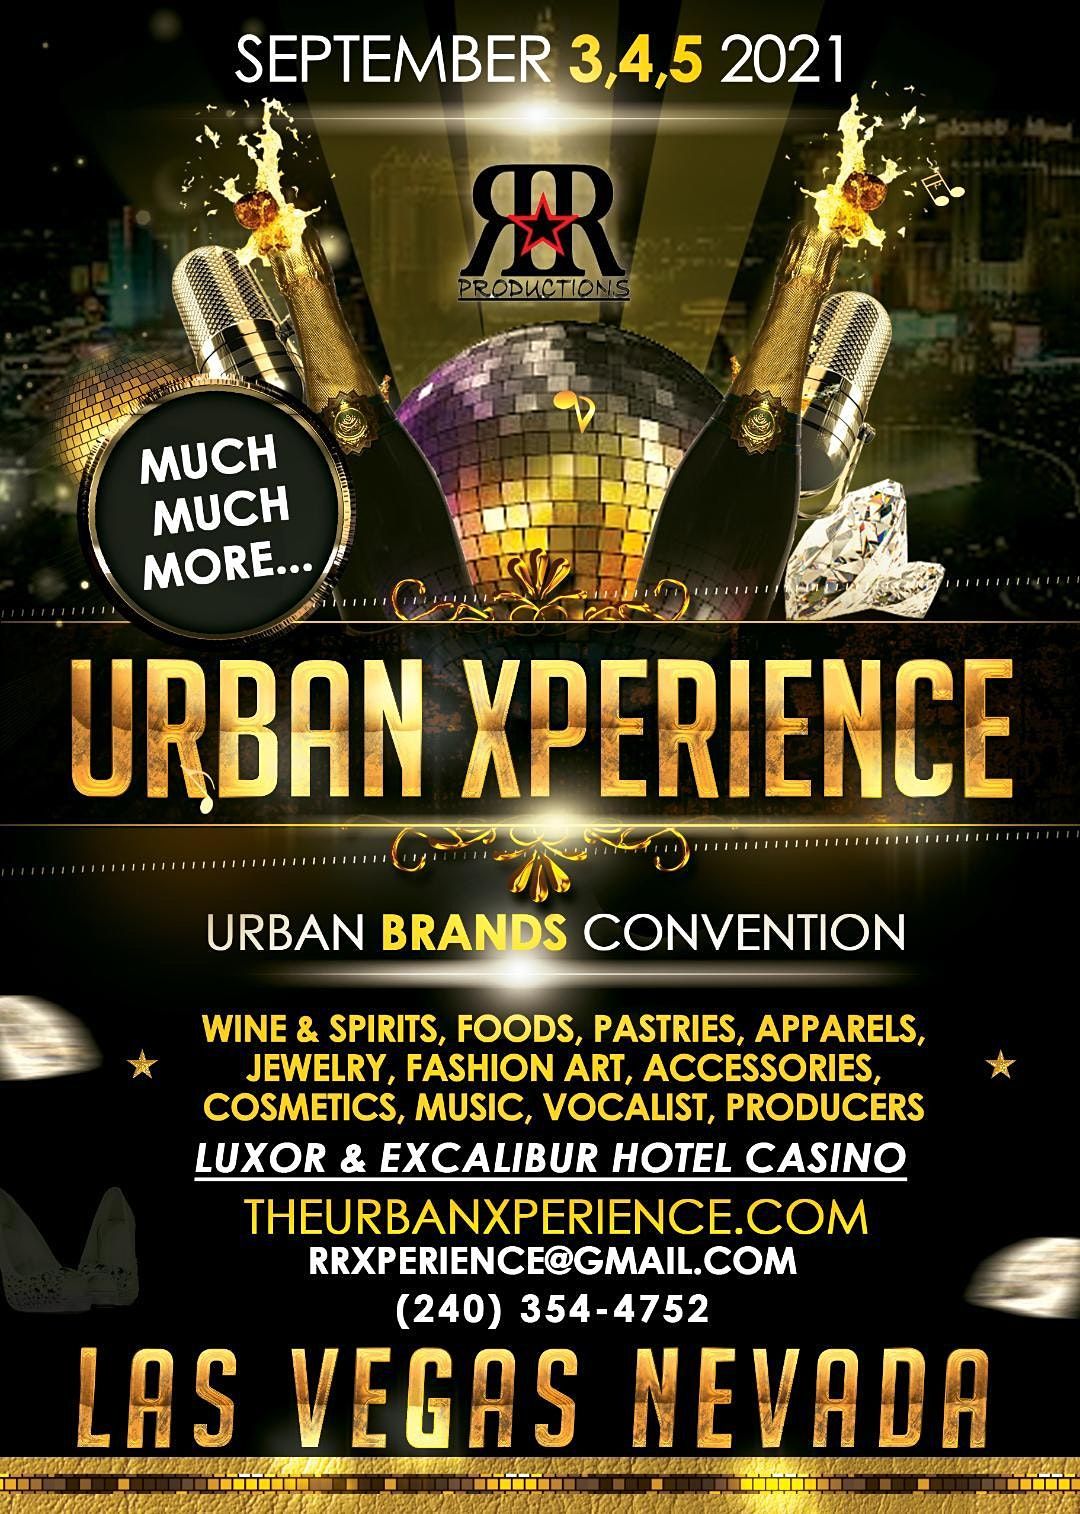 THE URBAN XPERIENCE CONVENTION ALL ACCESS